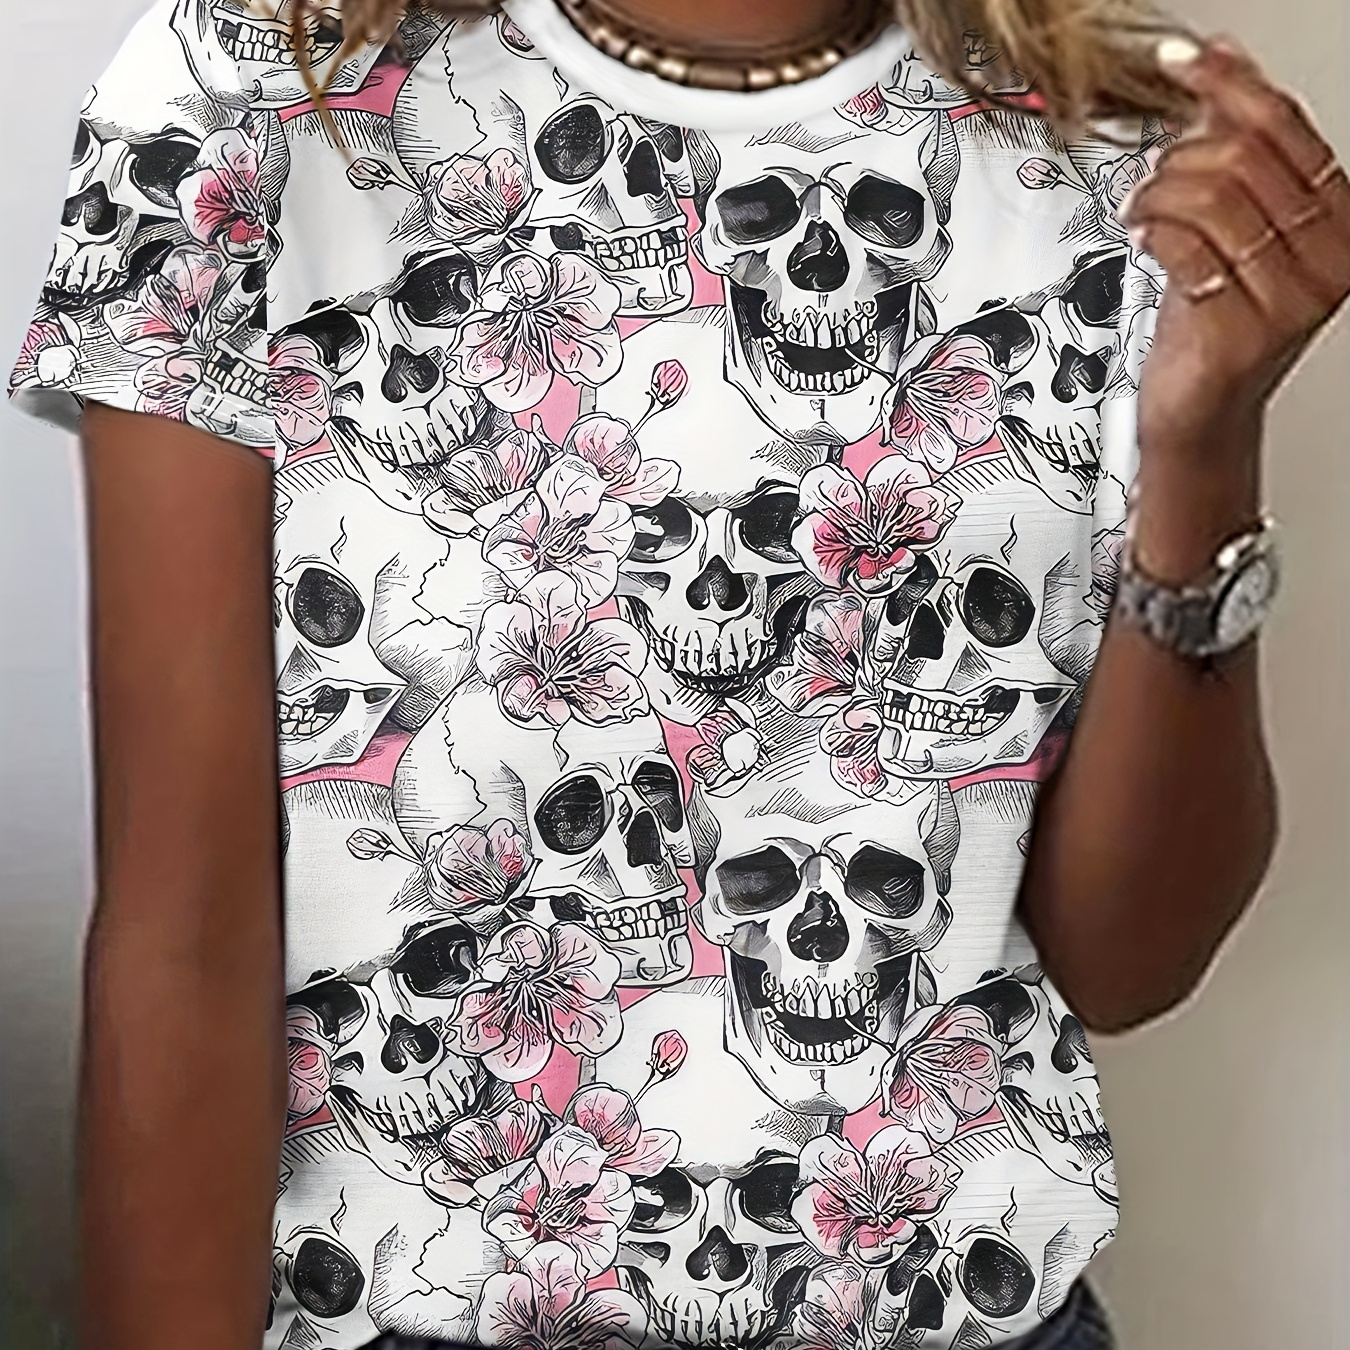 

Skull Print Crew Neck T-shirt, Short Sleeve Casual Top For Spring & Summer, Women's Clothing